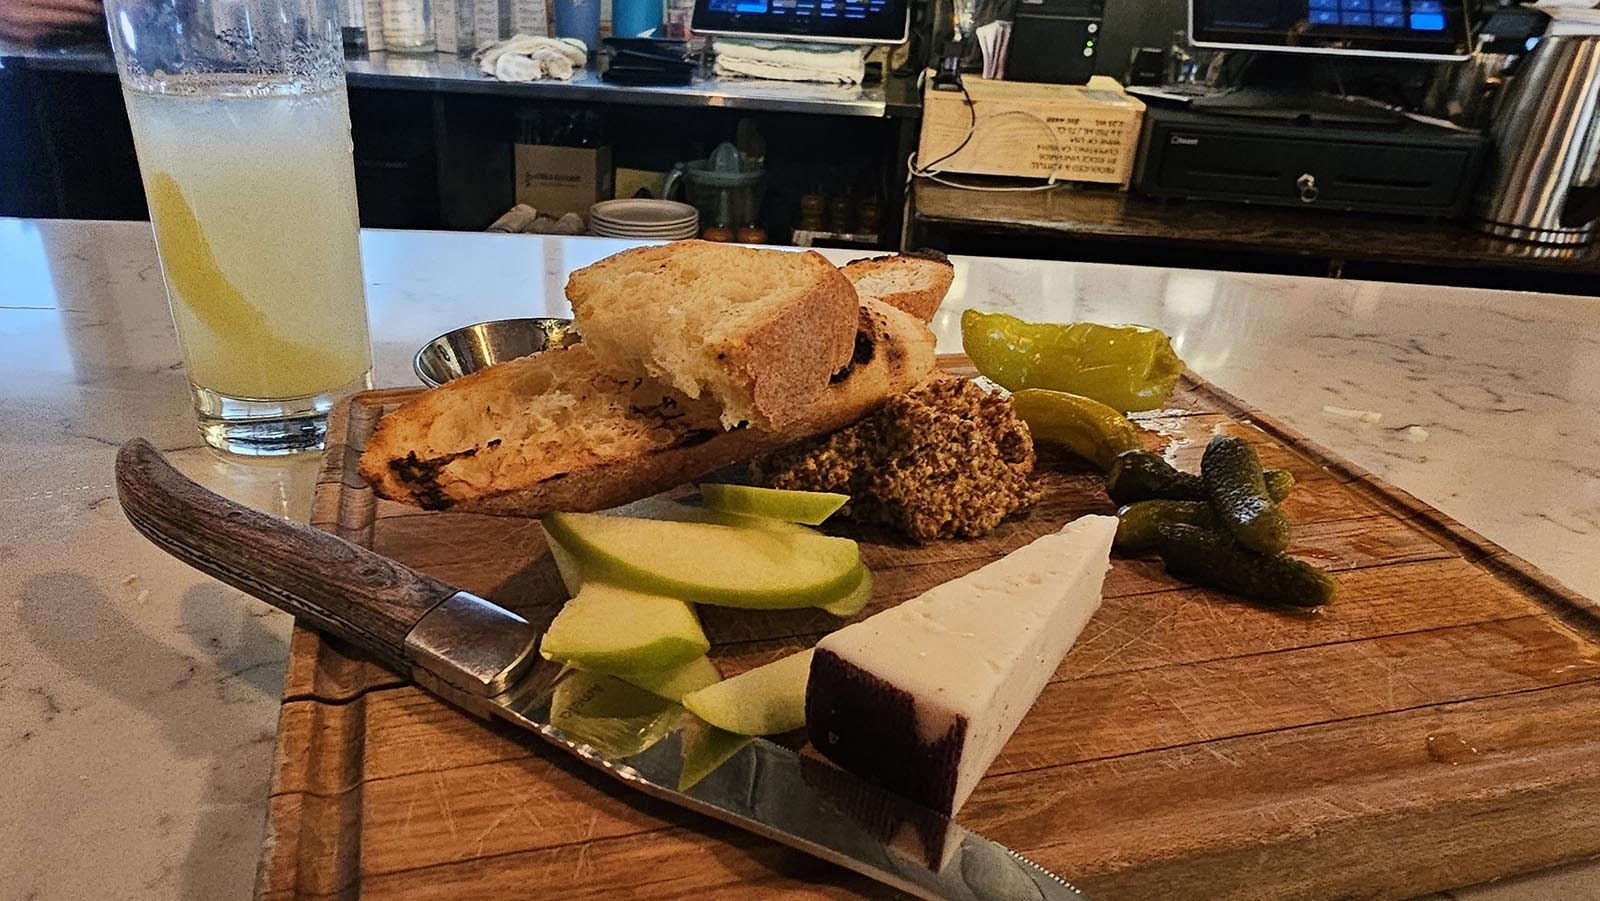 The cheese plates at Bin22 comes with spicy mustard, fig jam, pickles, peppers, bread, and apple slices.